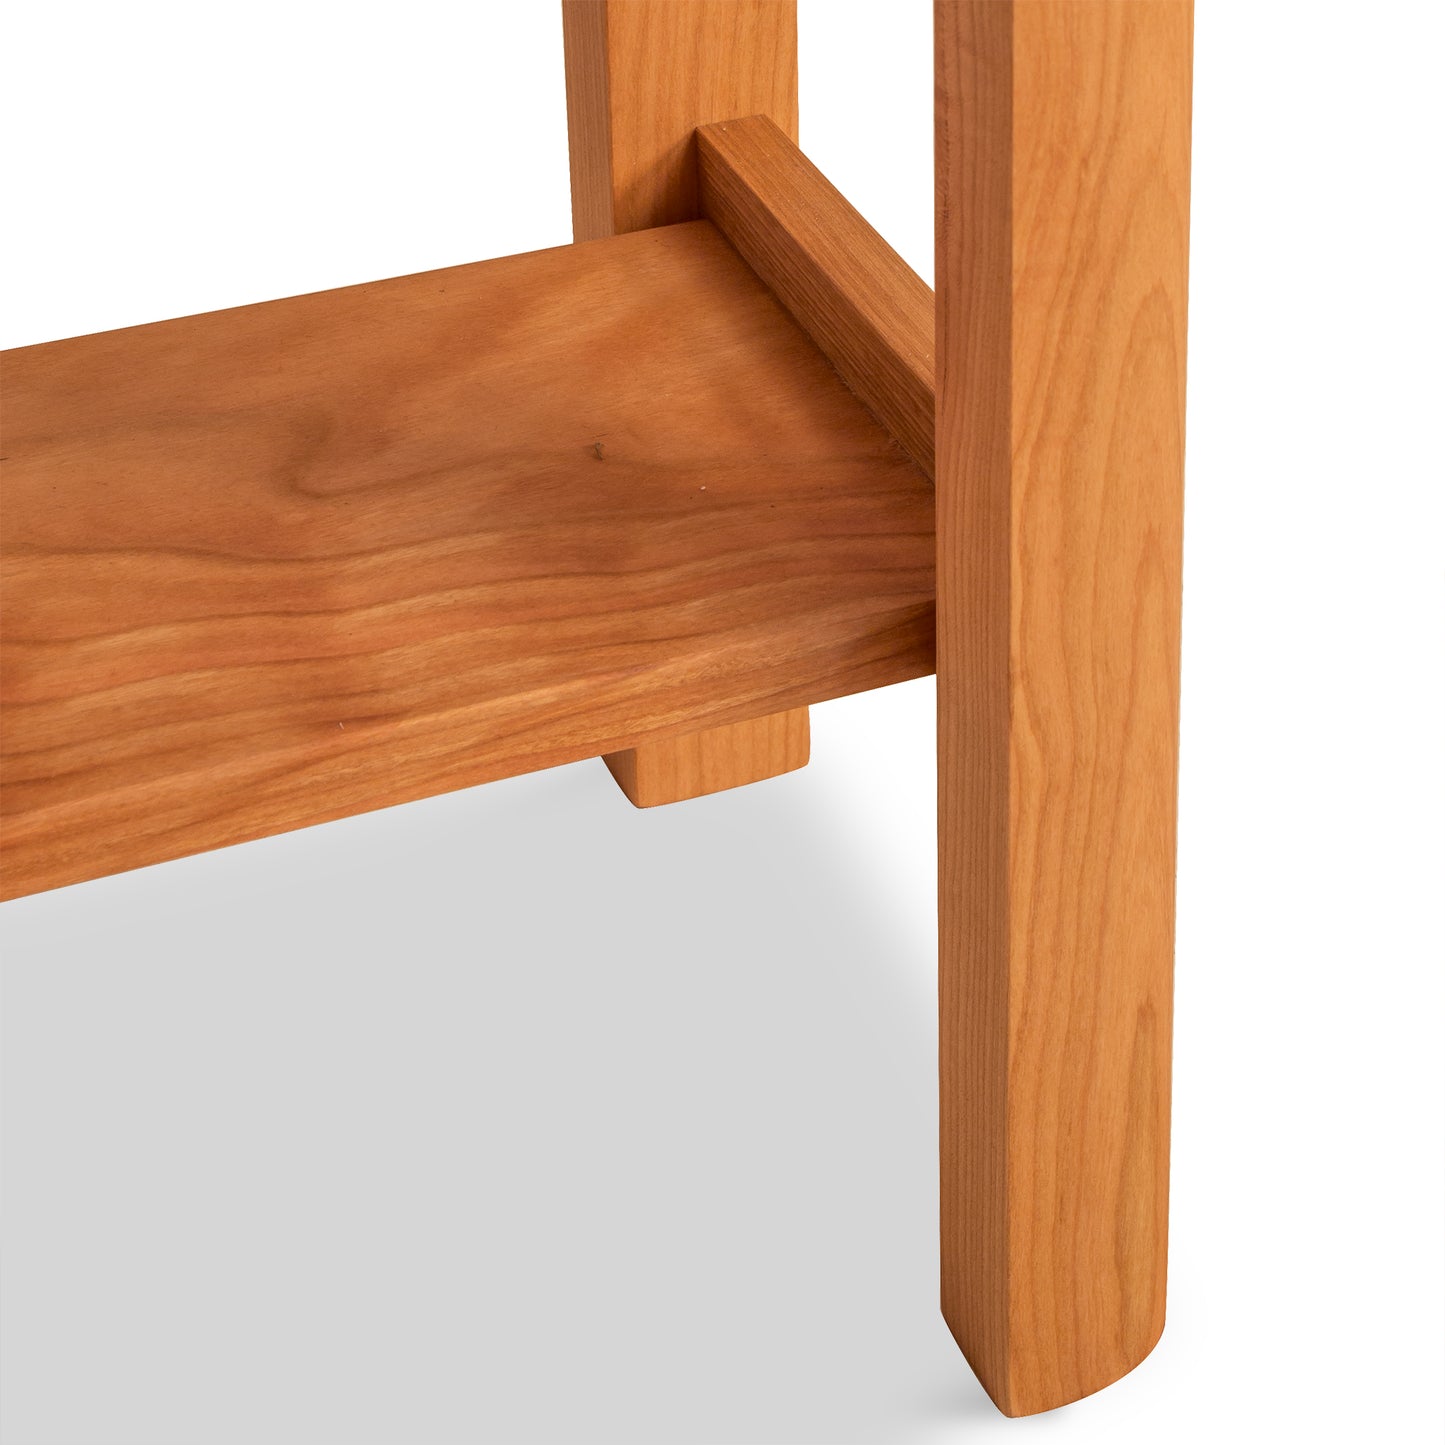 Close-up of a Vermont Furniture Designs Heartwood Shaker End Table leg and seat junction showing the wood grain and eco-friendly oil finish construction detail.